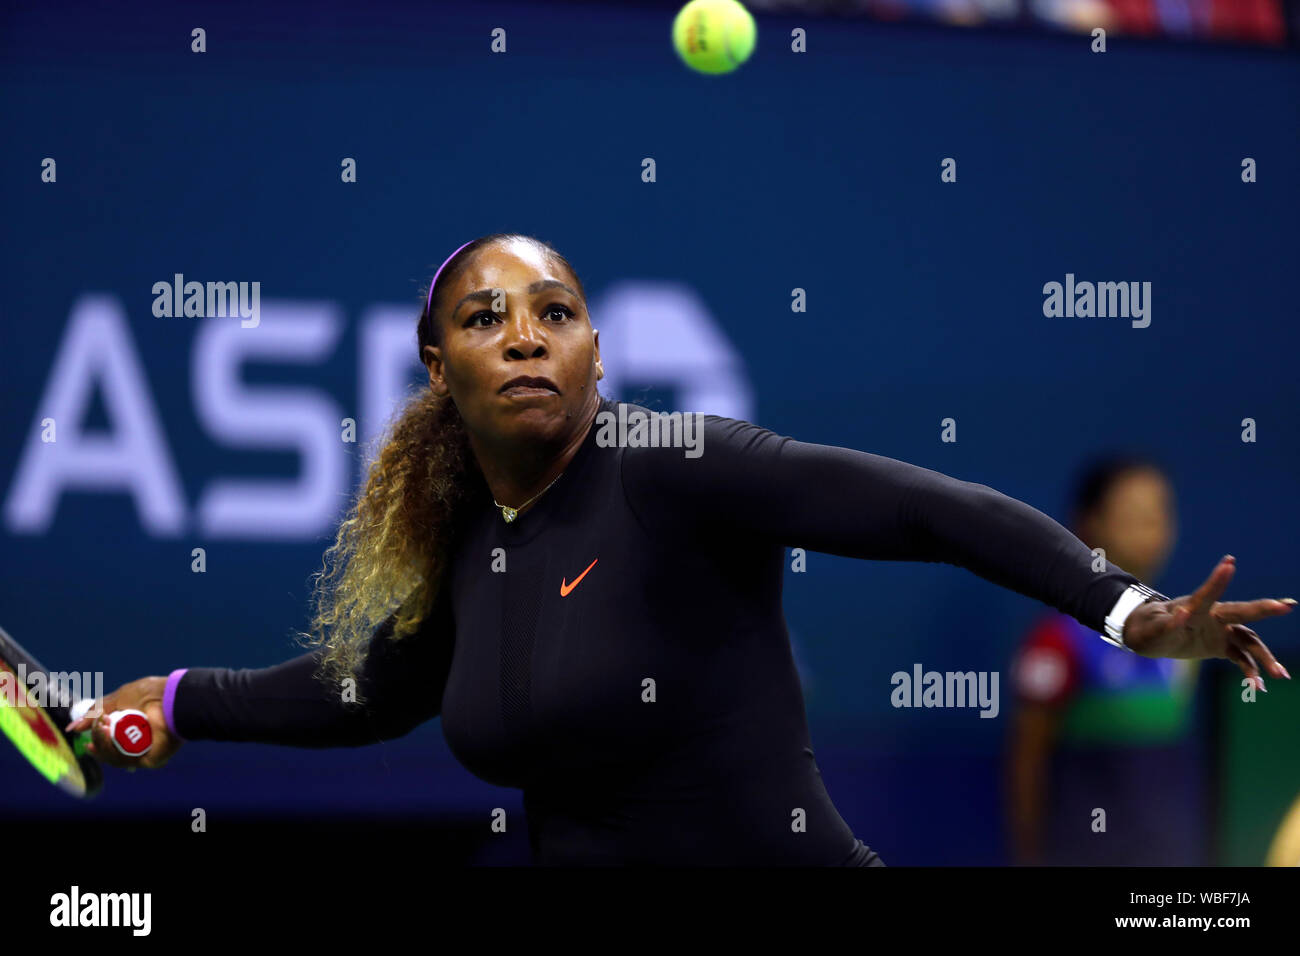 Flushing Meadows, New York, United States - August 26, 2019.   Serena Williams sets up a forehand return during her first round match against Maria Sharapova on the first day of play at the US Open in Flushing Meadows, New York.  Williams won the match in straight sets. Credit: Adam Stoltman/Alamy Live News Stock Photo